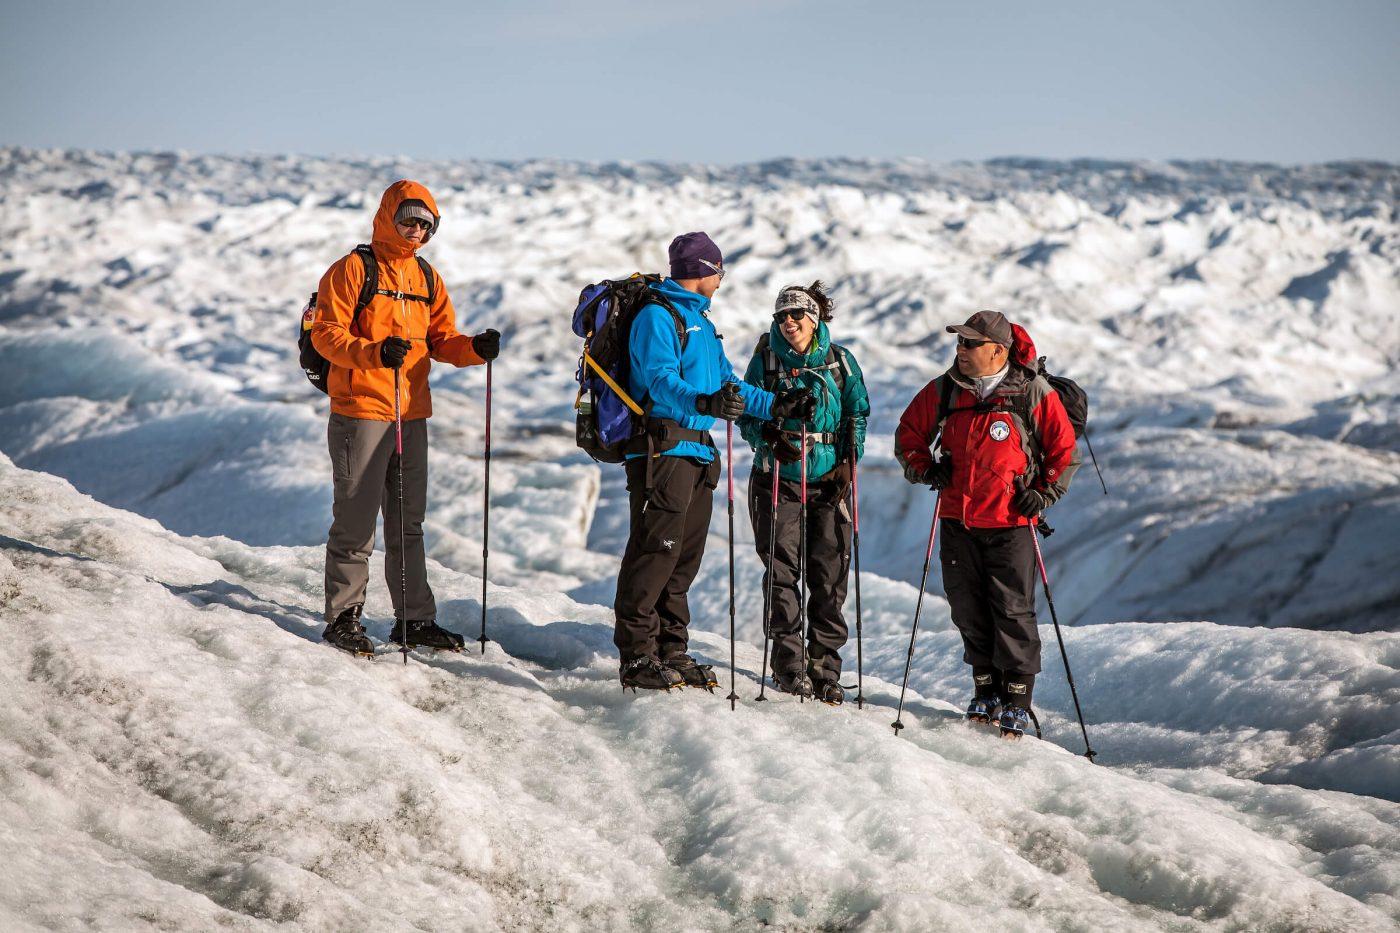 A group glacier walking on the Greenland Ice Sheet near Kangerlussuaq. Photo by Mads Pihl